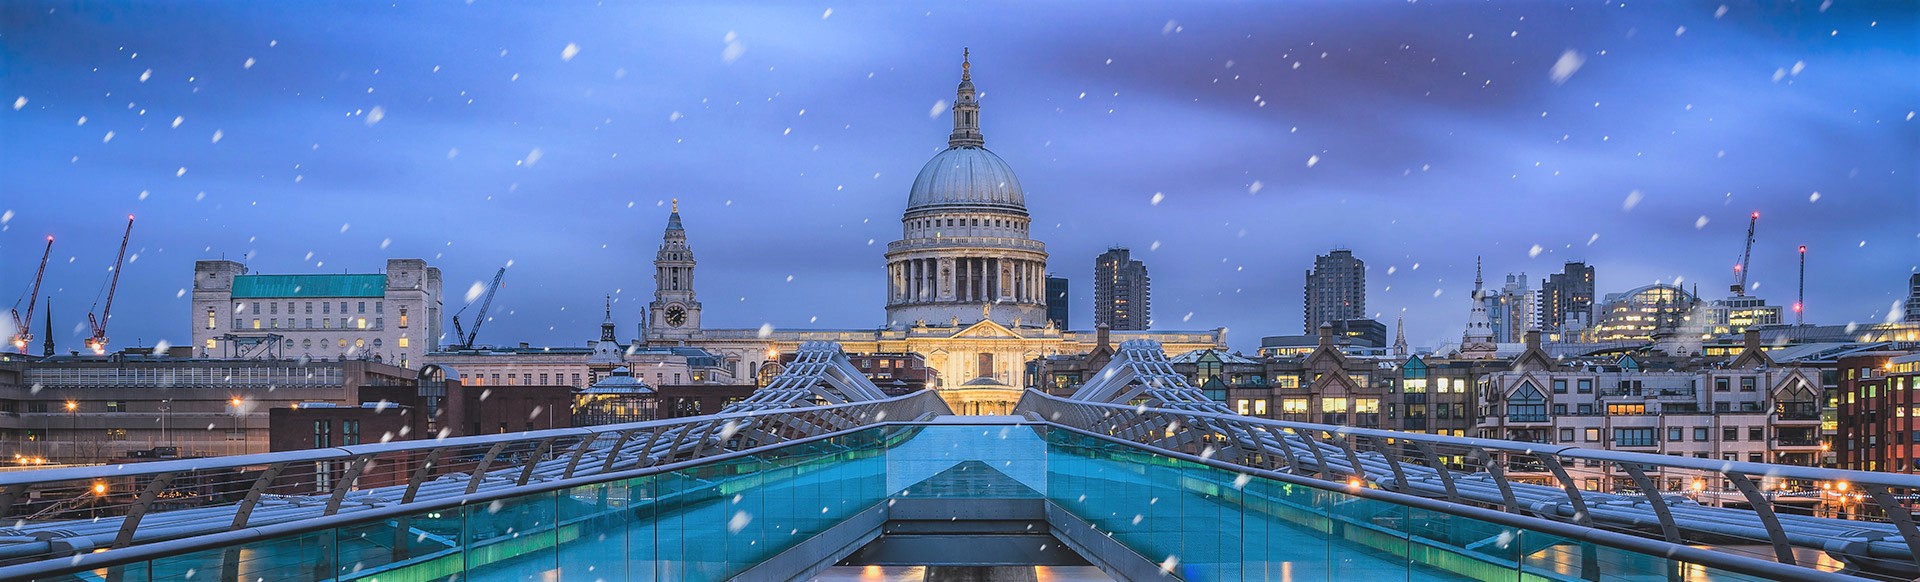 A view of St Paul's Cathedral on a snowy evening from the Millennium Bridge